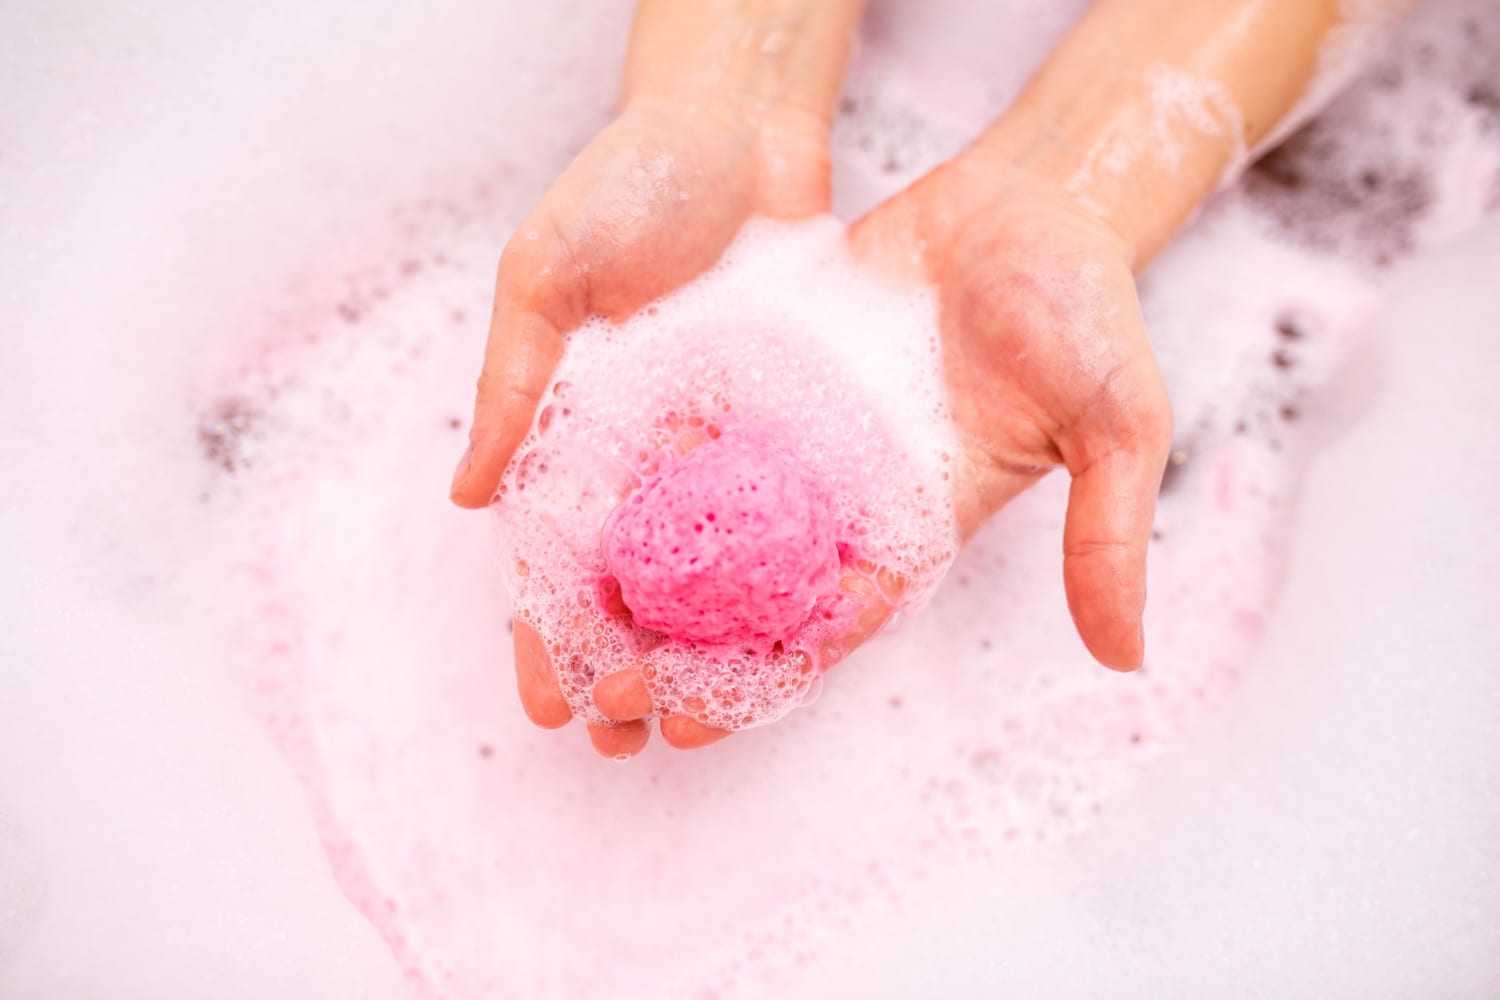 Fridababy bath bombs could help offer relief from colds and flu